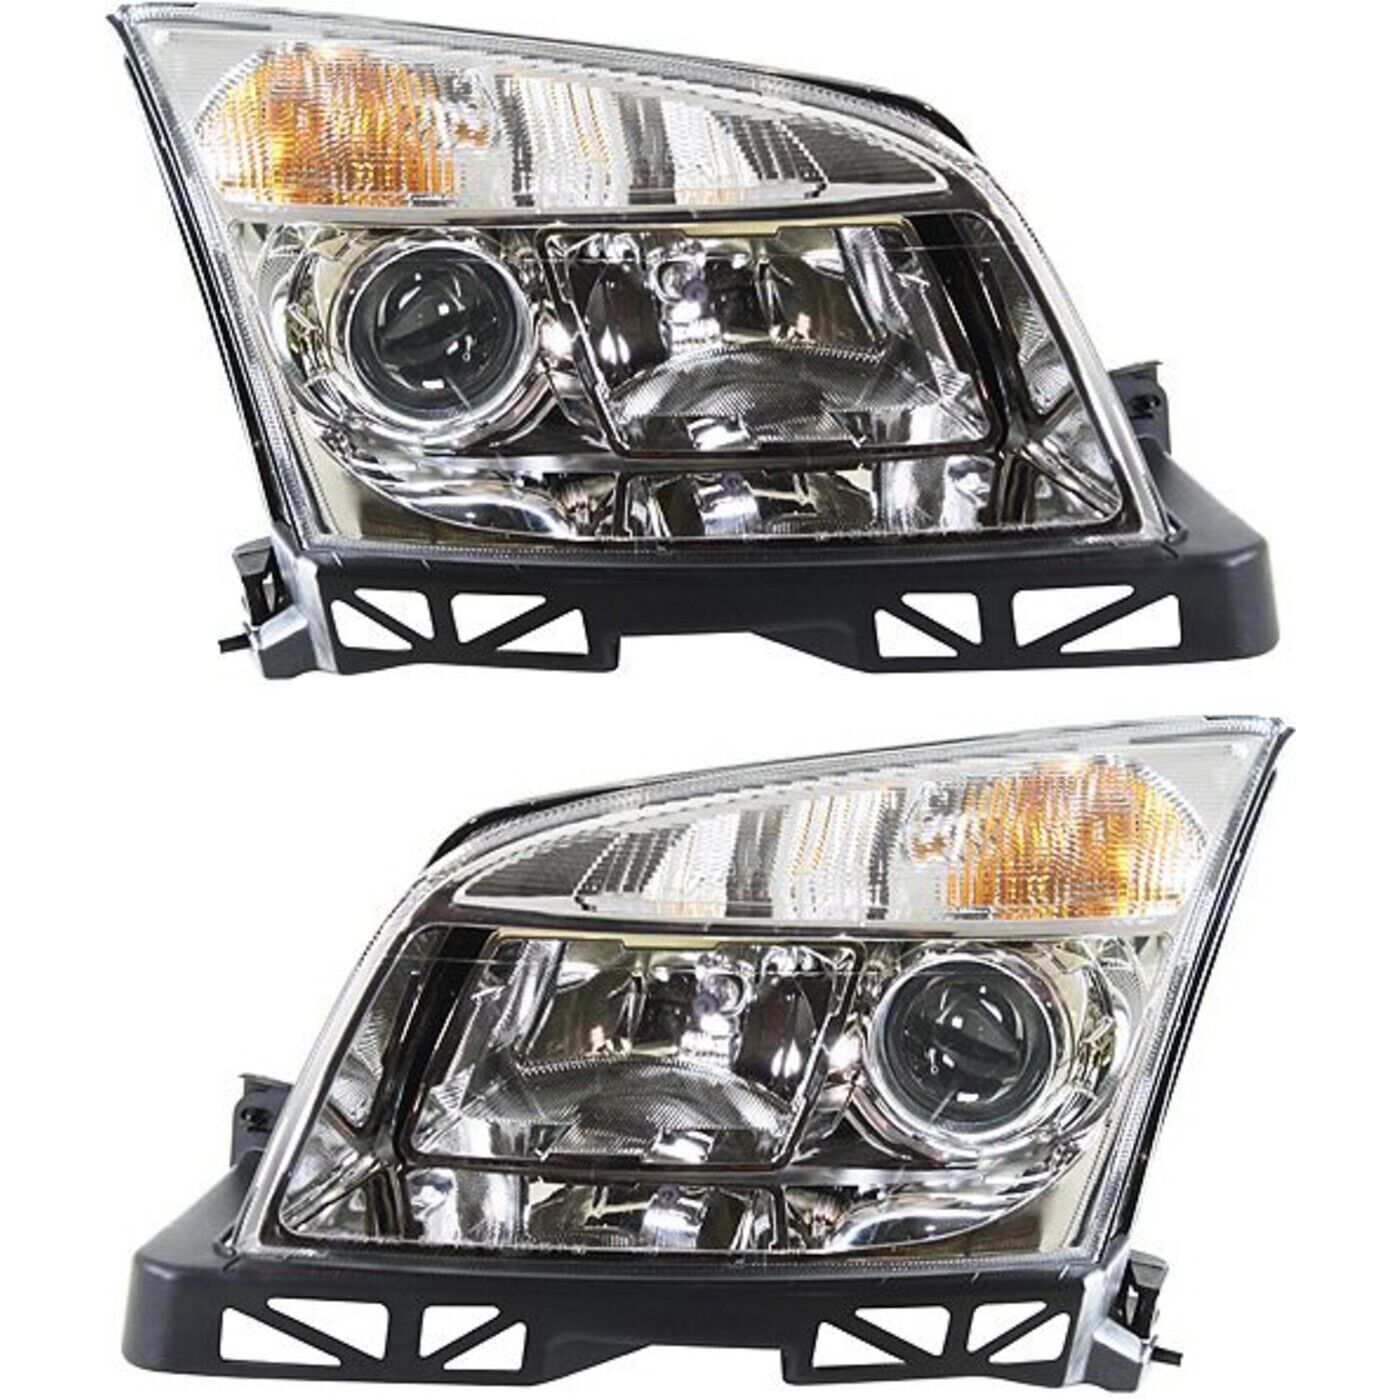 Headlight Set For 2006-2009 Mercury Milan Left and Right With Bulb 2Pc